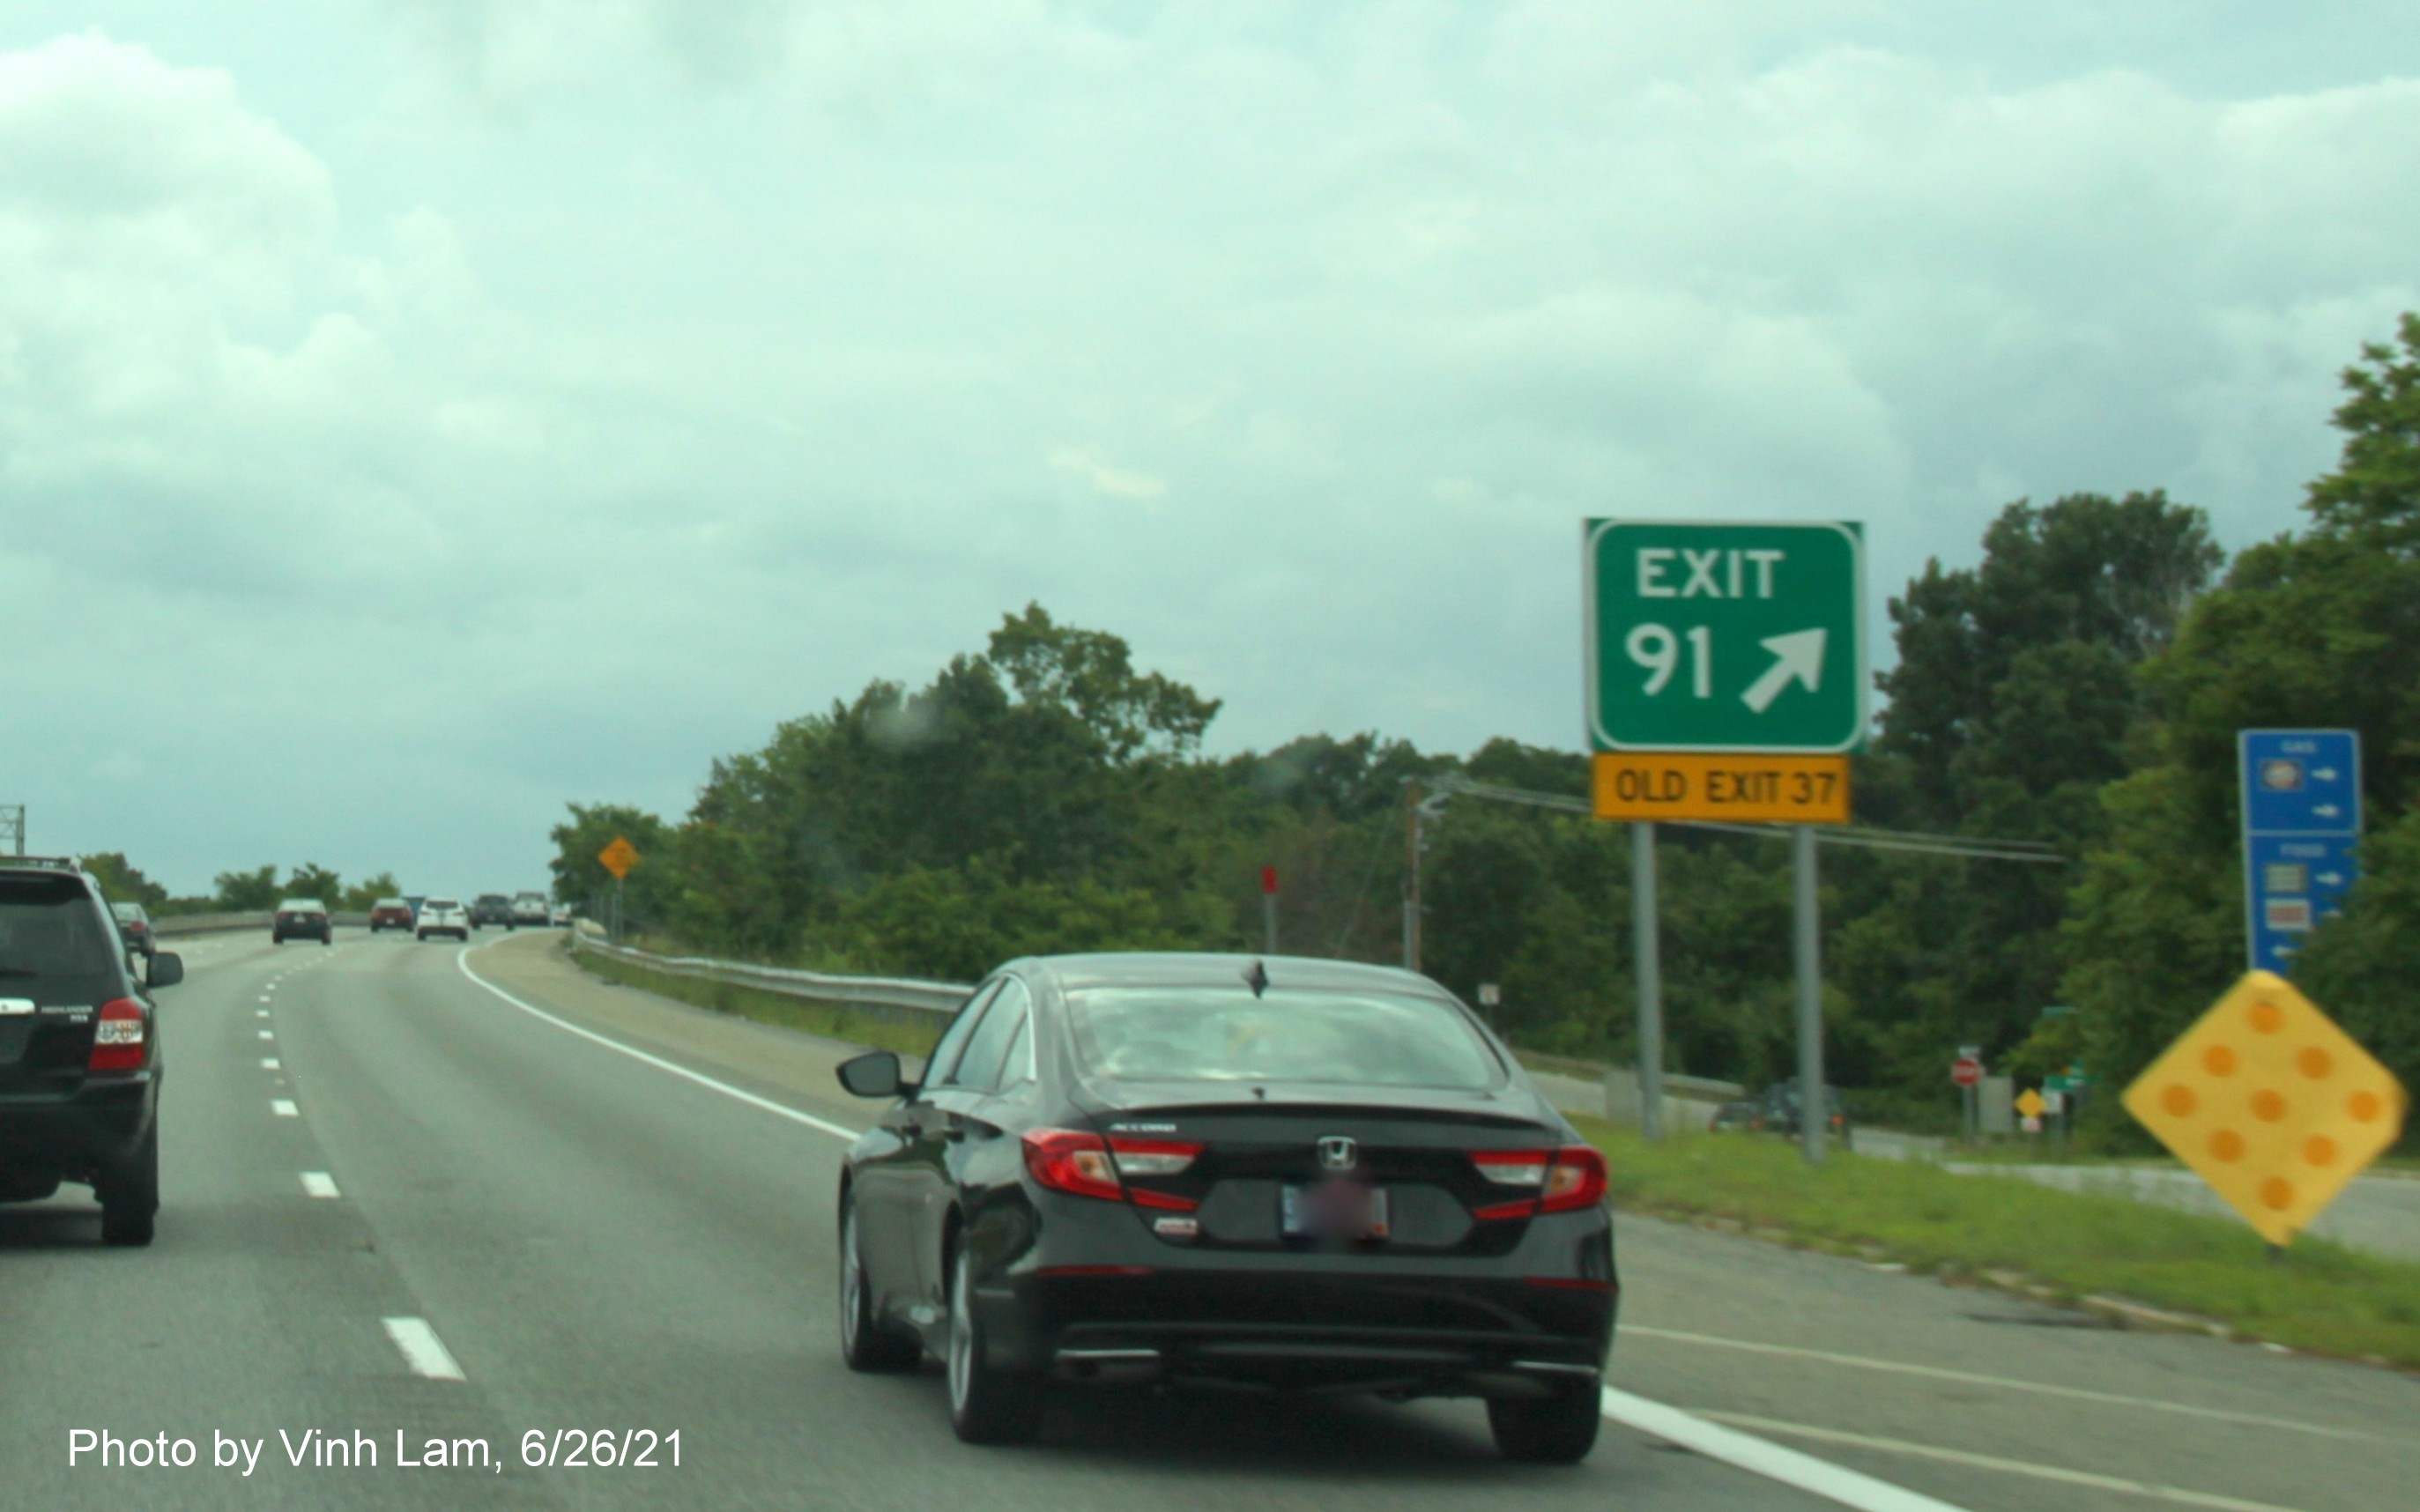 Image of gore sign for Woburn Street exit with new milepost based exit number and yellow Old Exit 37 sign attached below on I-495 South in Lowell, by Vinh Lam, June 2021